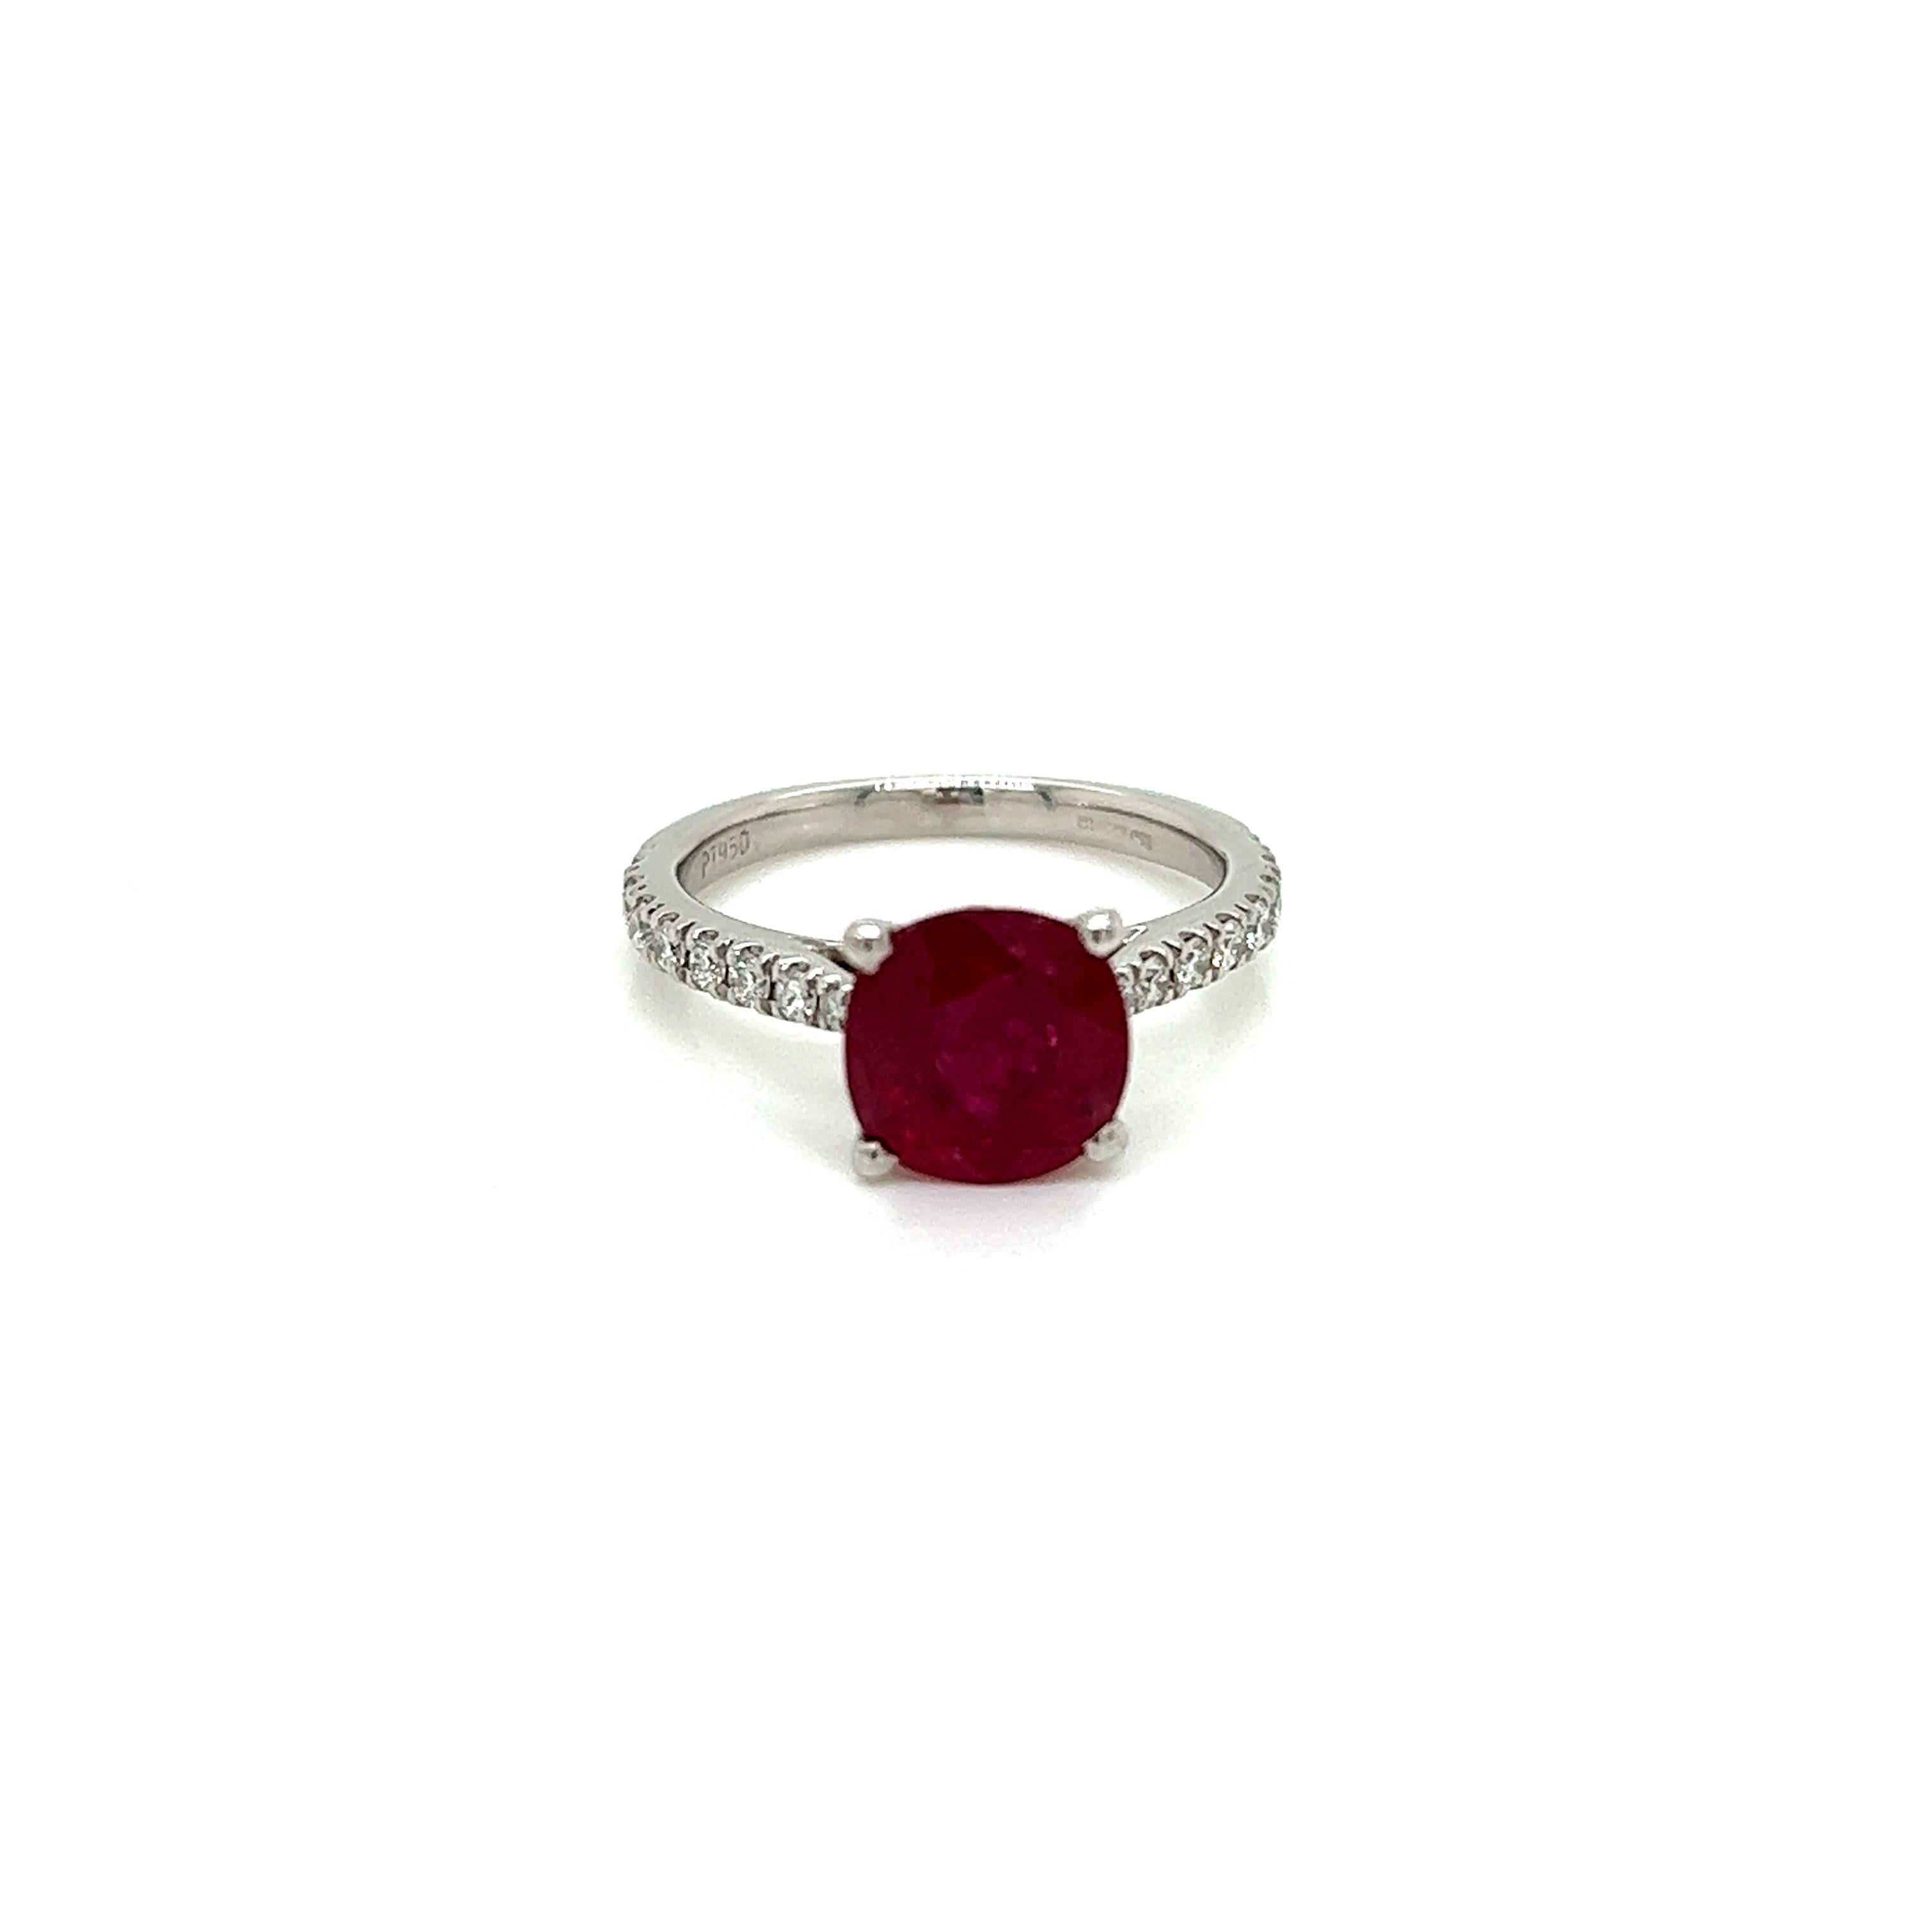 This alluring ring features a 1.87 Carat Ruby at its centre, held in a claw setting on a Diamond-encrusted Platinum band.  
The cushion cut Ruby is a rich, slightly pinkish red. Its deep hues are contrasted by the iridescent Diamonds accompanying it